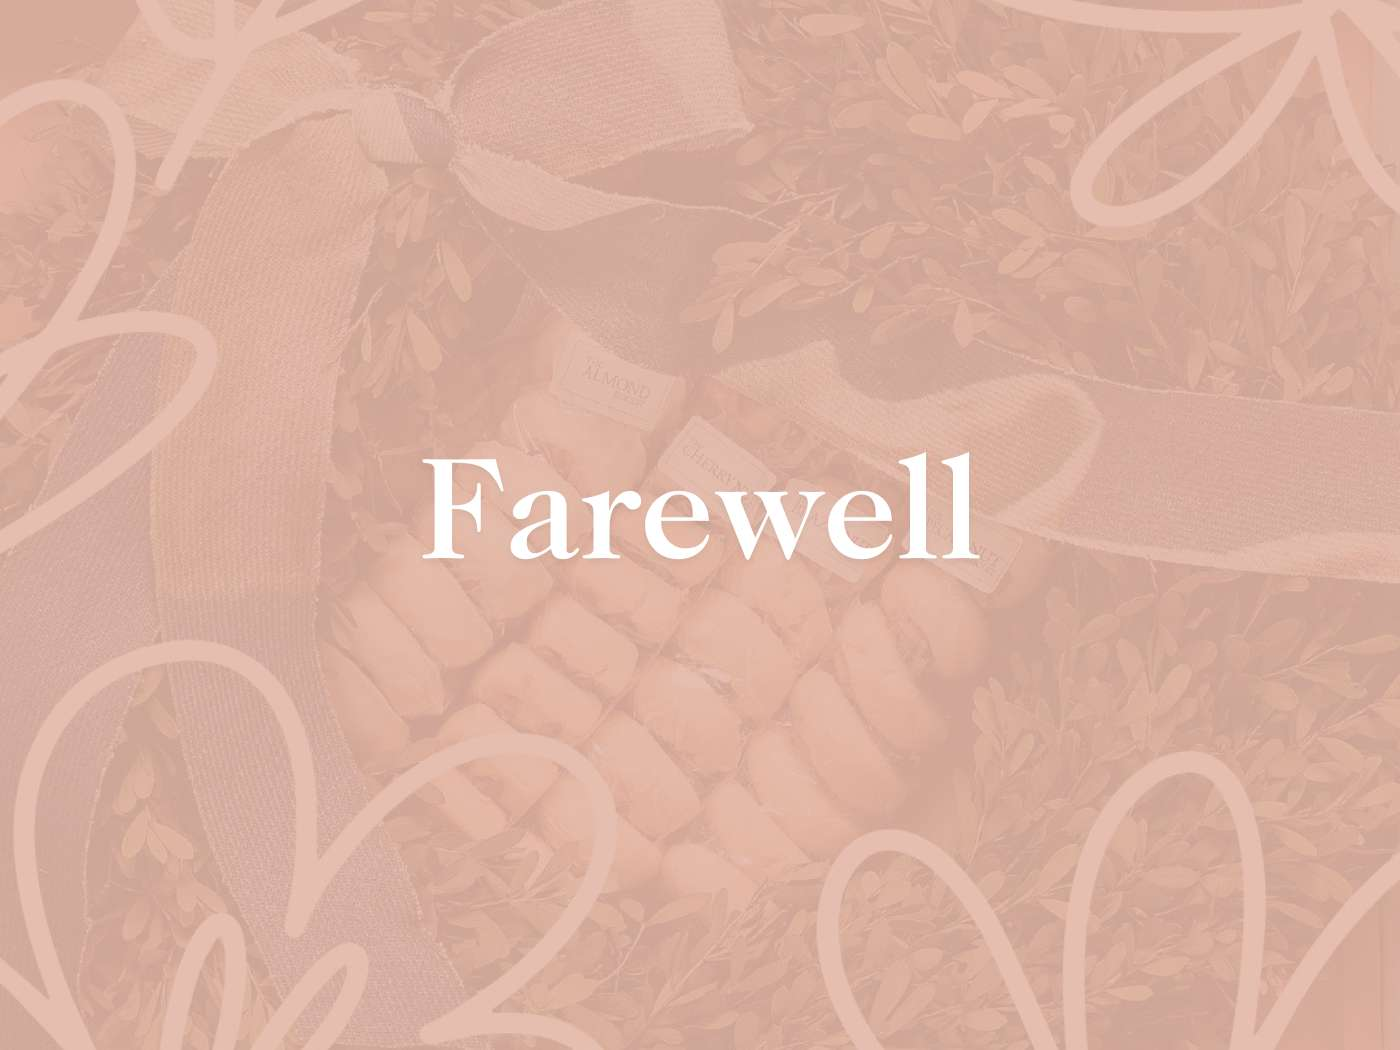 An elegant display featuring the word 'Farewell' set against a backdrop of soft floral arrangements and ribbons in a gentle sepia tone, part of the Farewell Flowers and Gifts Collection from Fabulous Flowers and Gifts, thoughtfully curated to express sentiments of goodbye and good wishes.